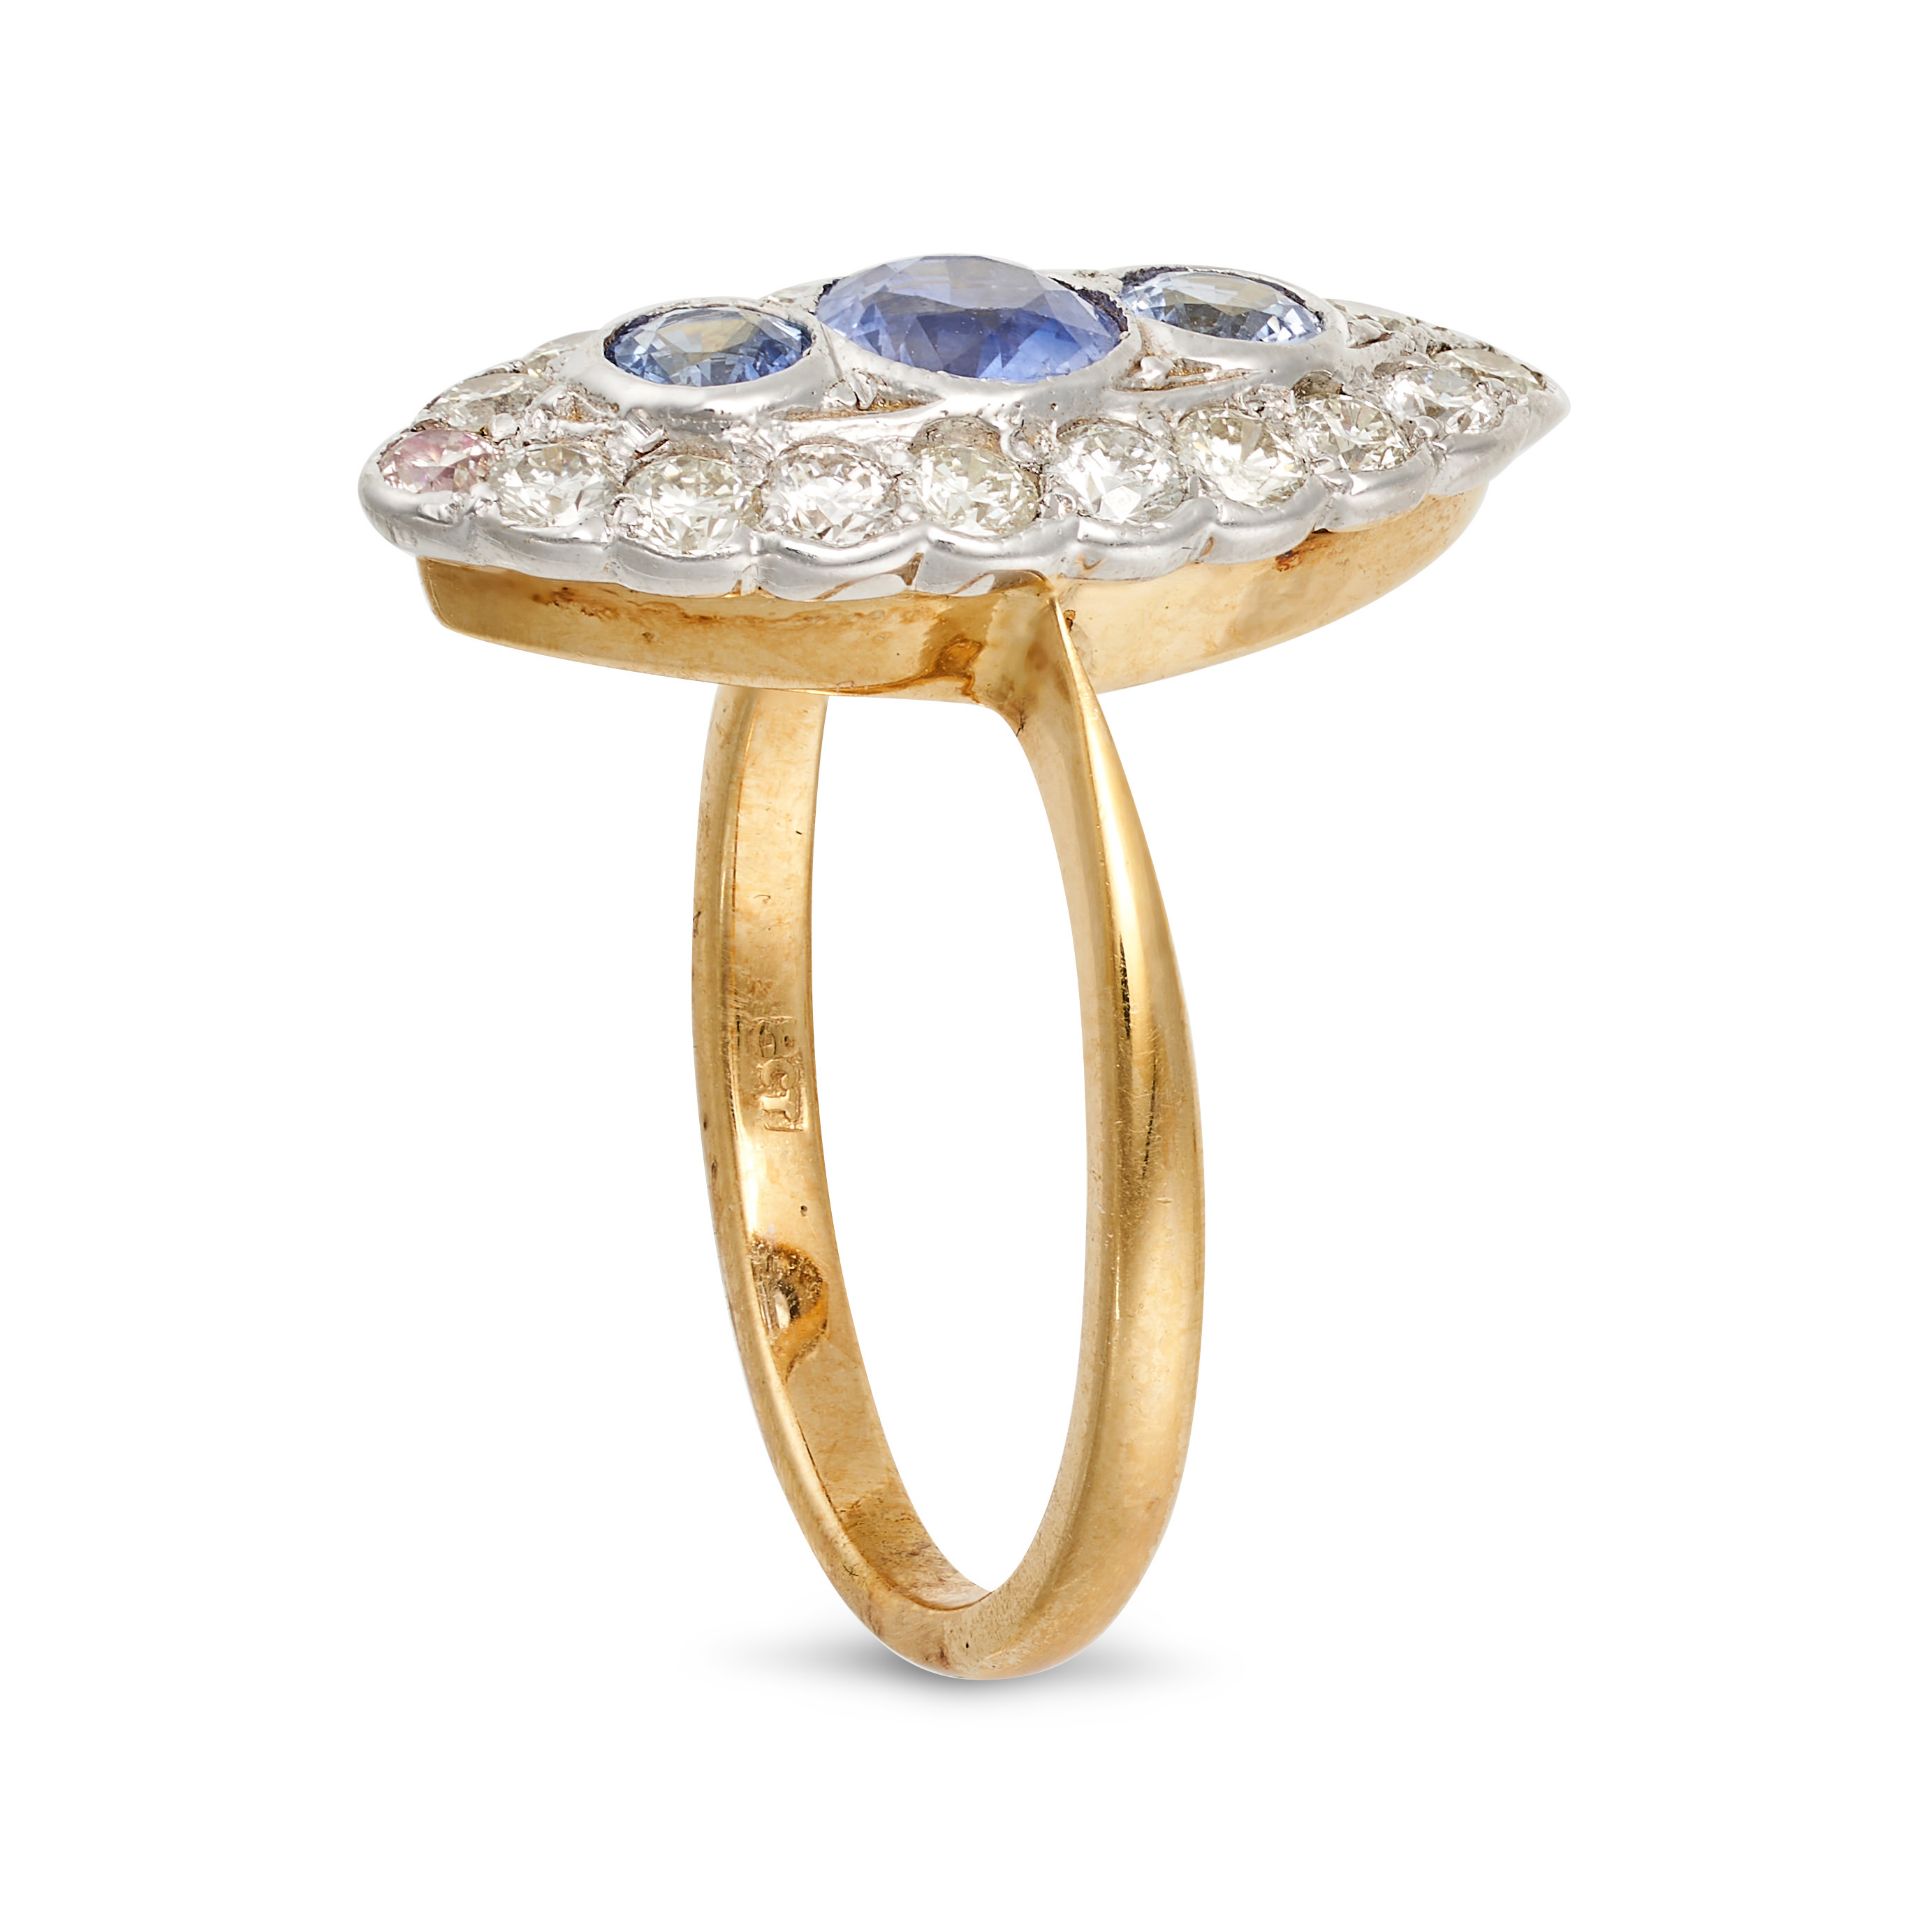 NO RESERVE - A SAPPHIRE AND DIAMOND NAVETTE RING in 18ct white and yellow gold, the navette shape... - Bild 2 aus 2